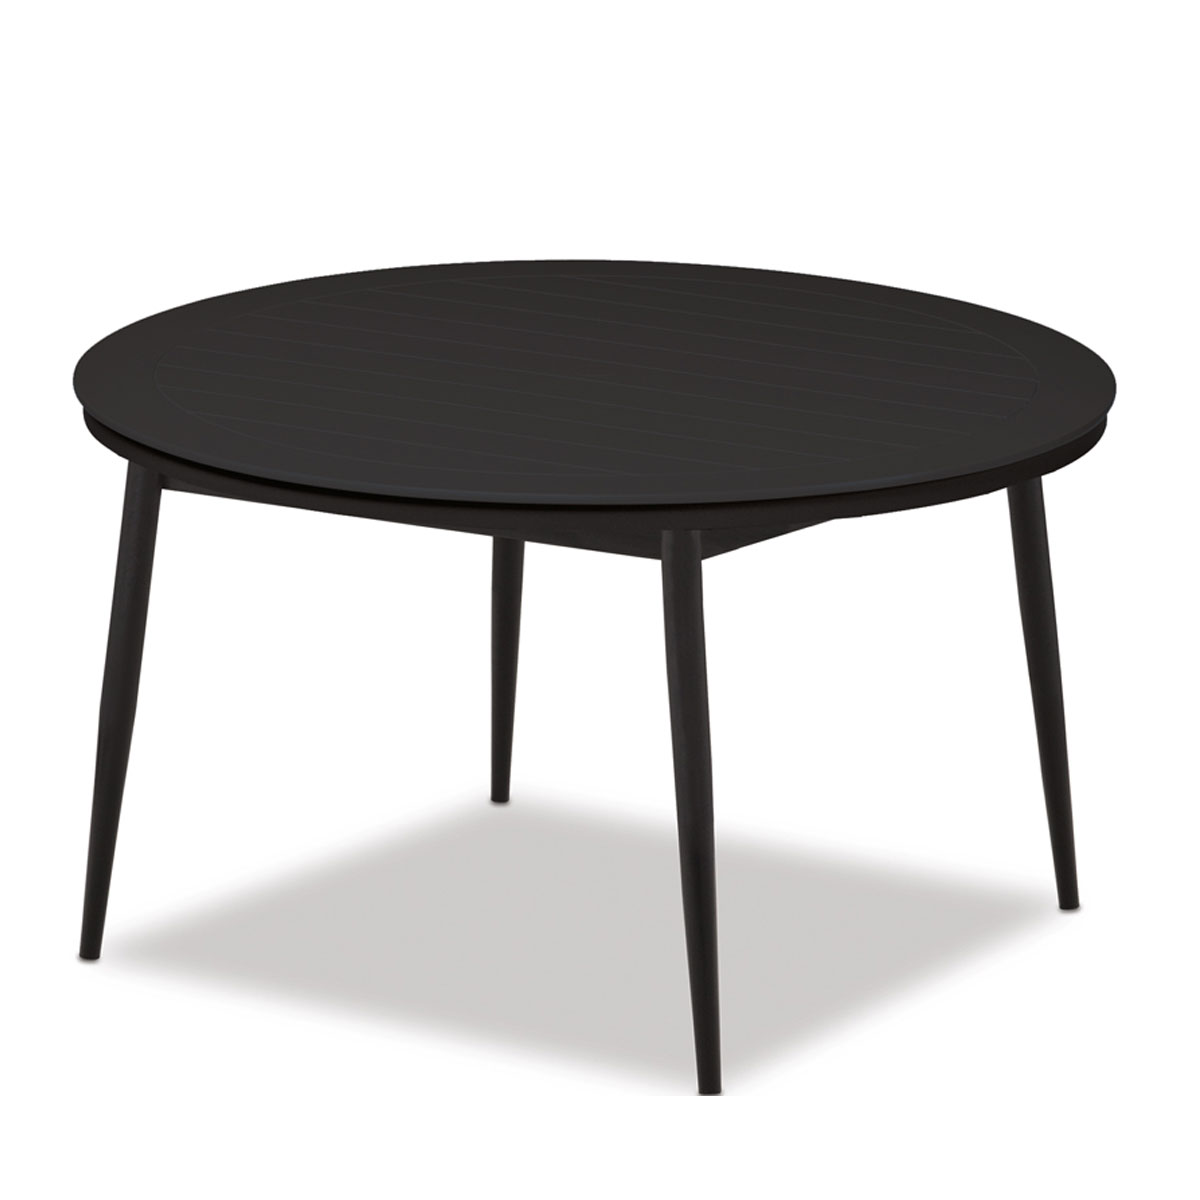 Telescope Casual MGP Top, 54 inch Round Dining Height Table with Tapered Legs